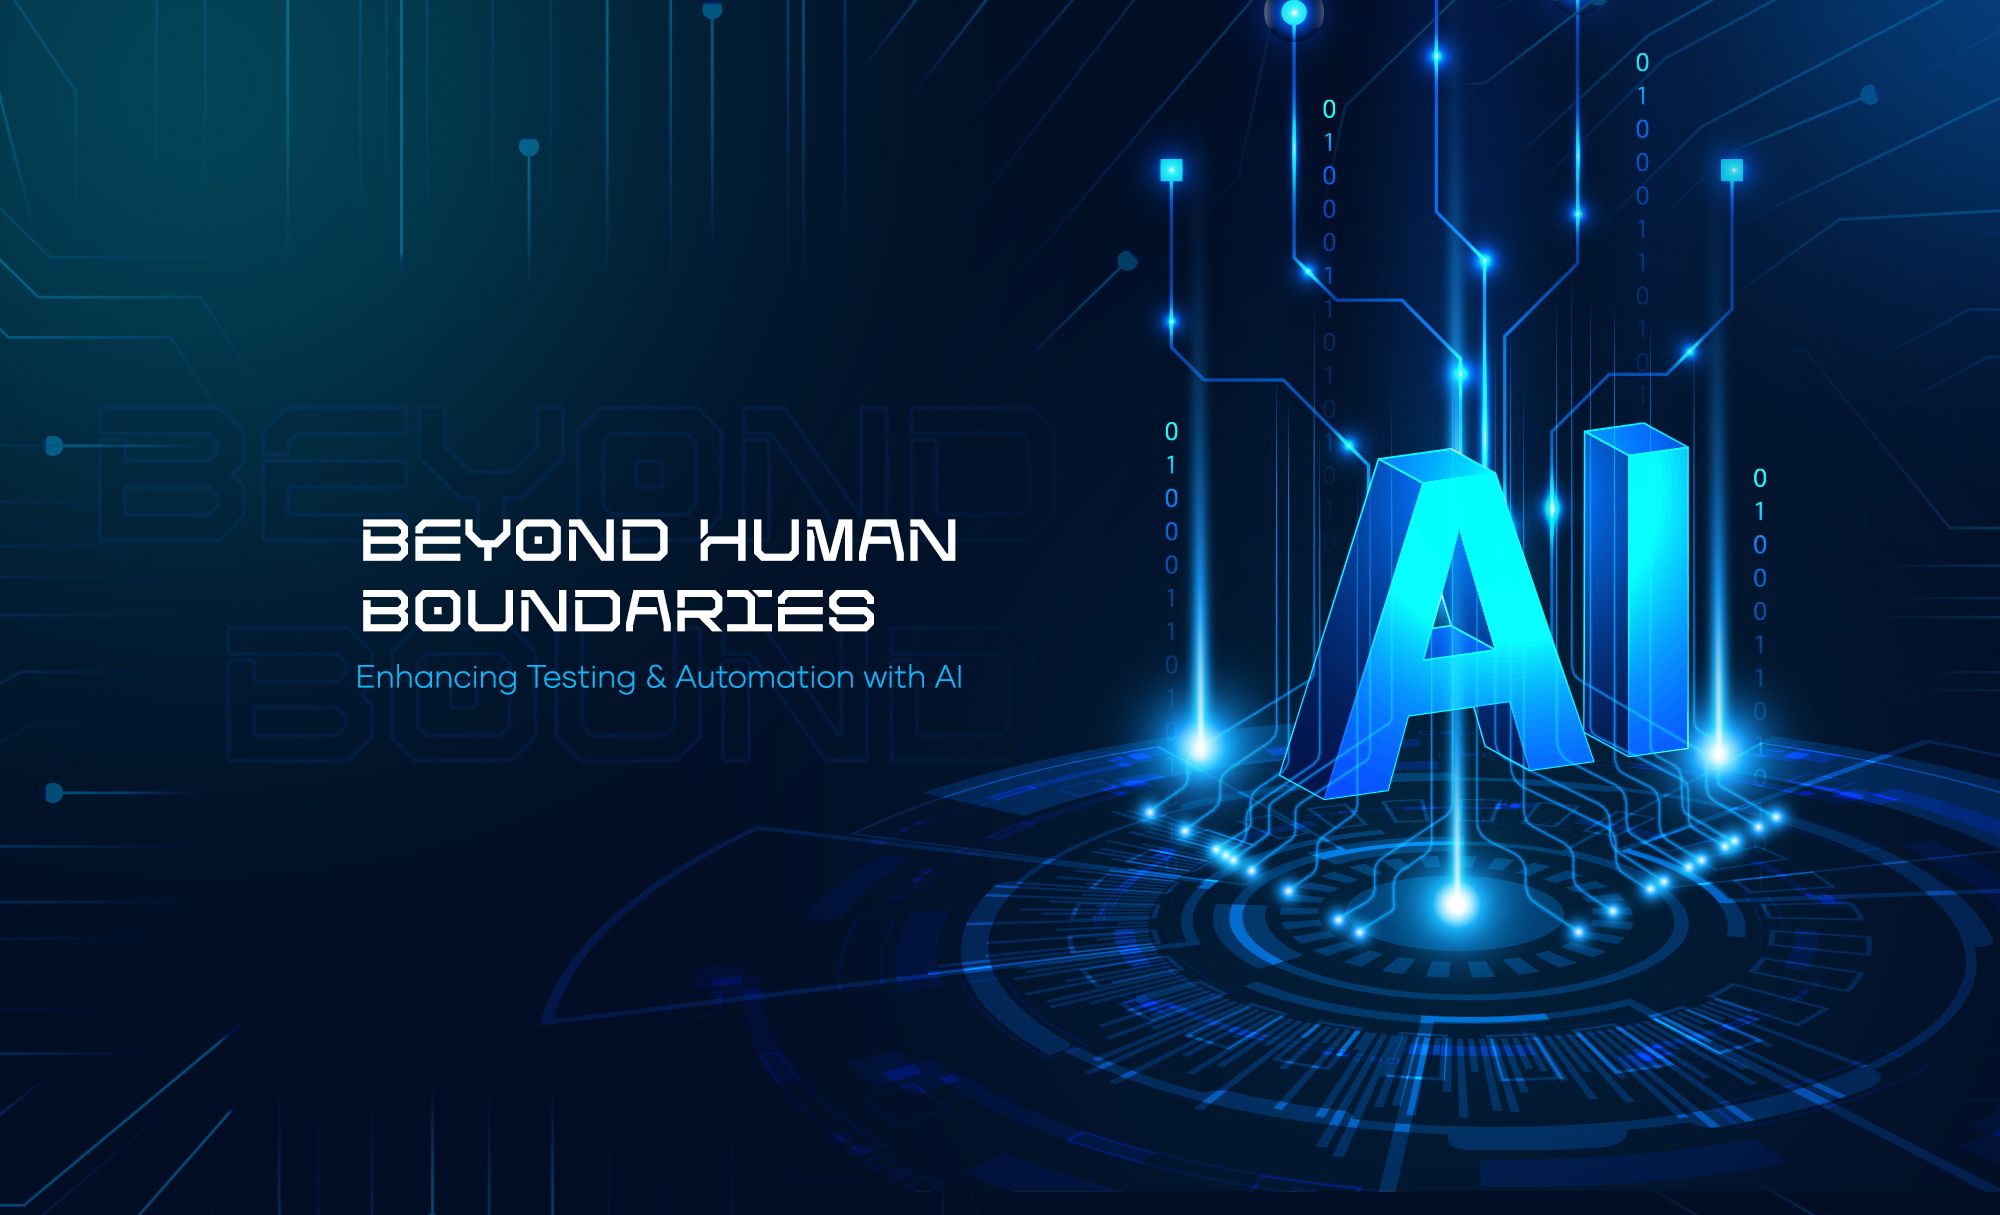 Blog post | Beyond Human Boundaries: Enhancing Testing and Automation with AI - Part 2